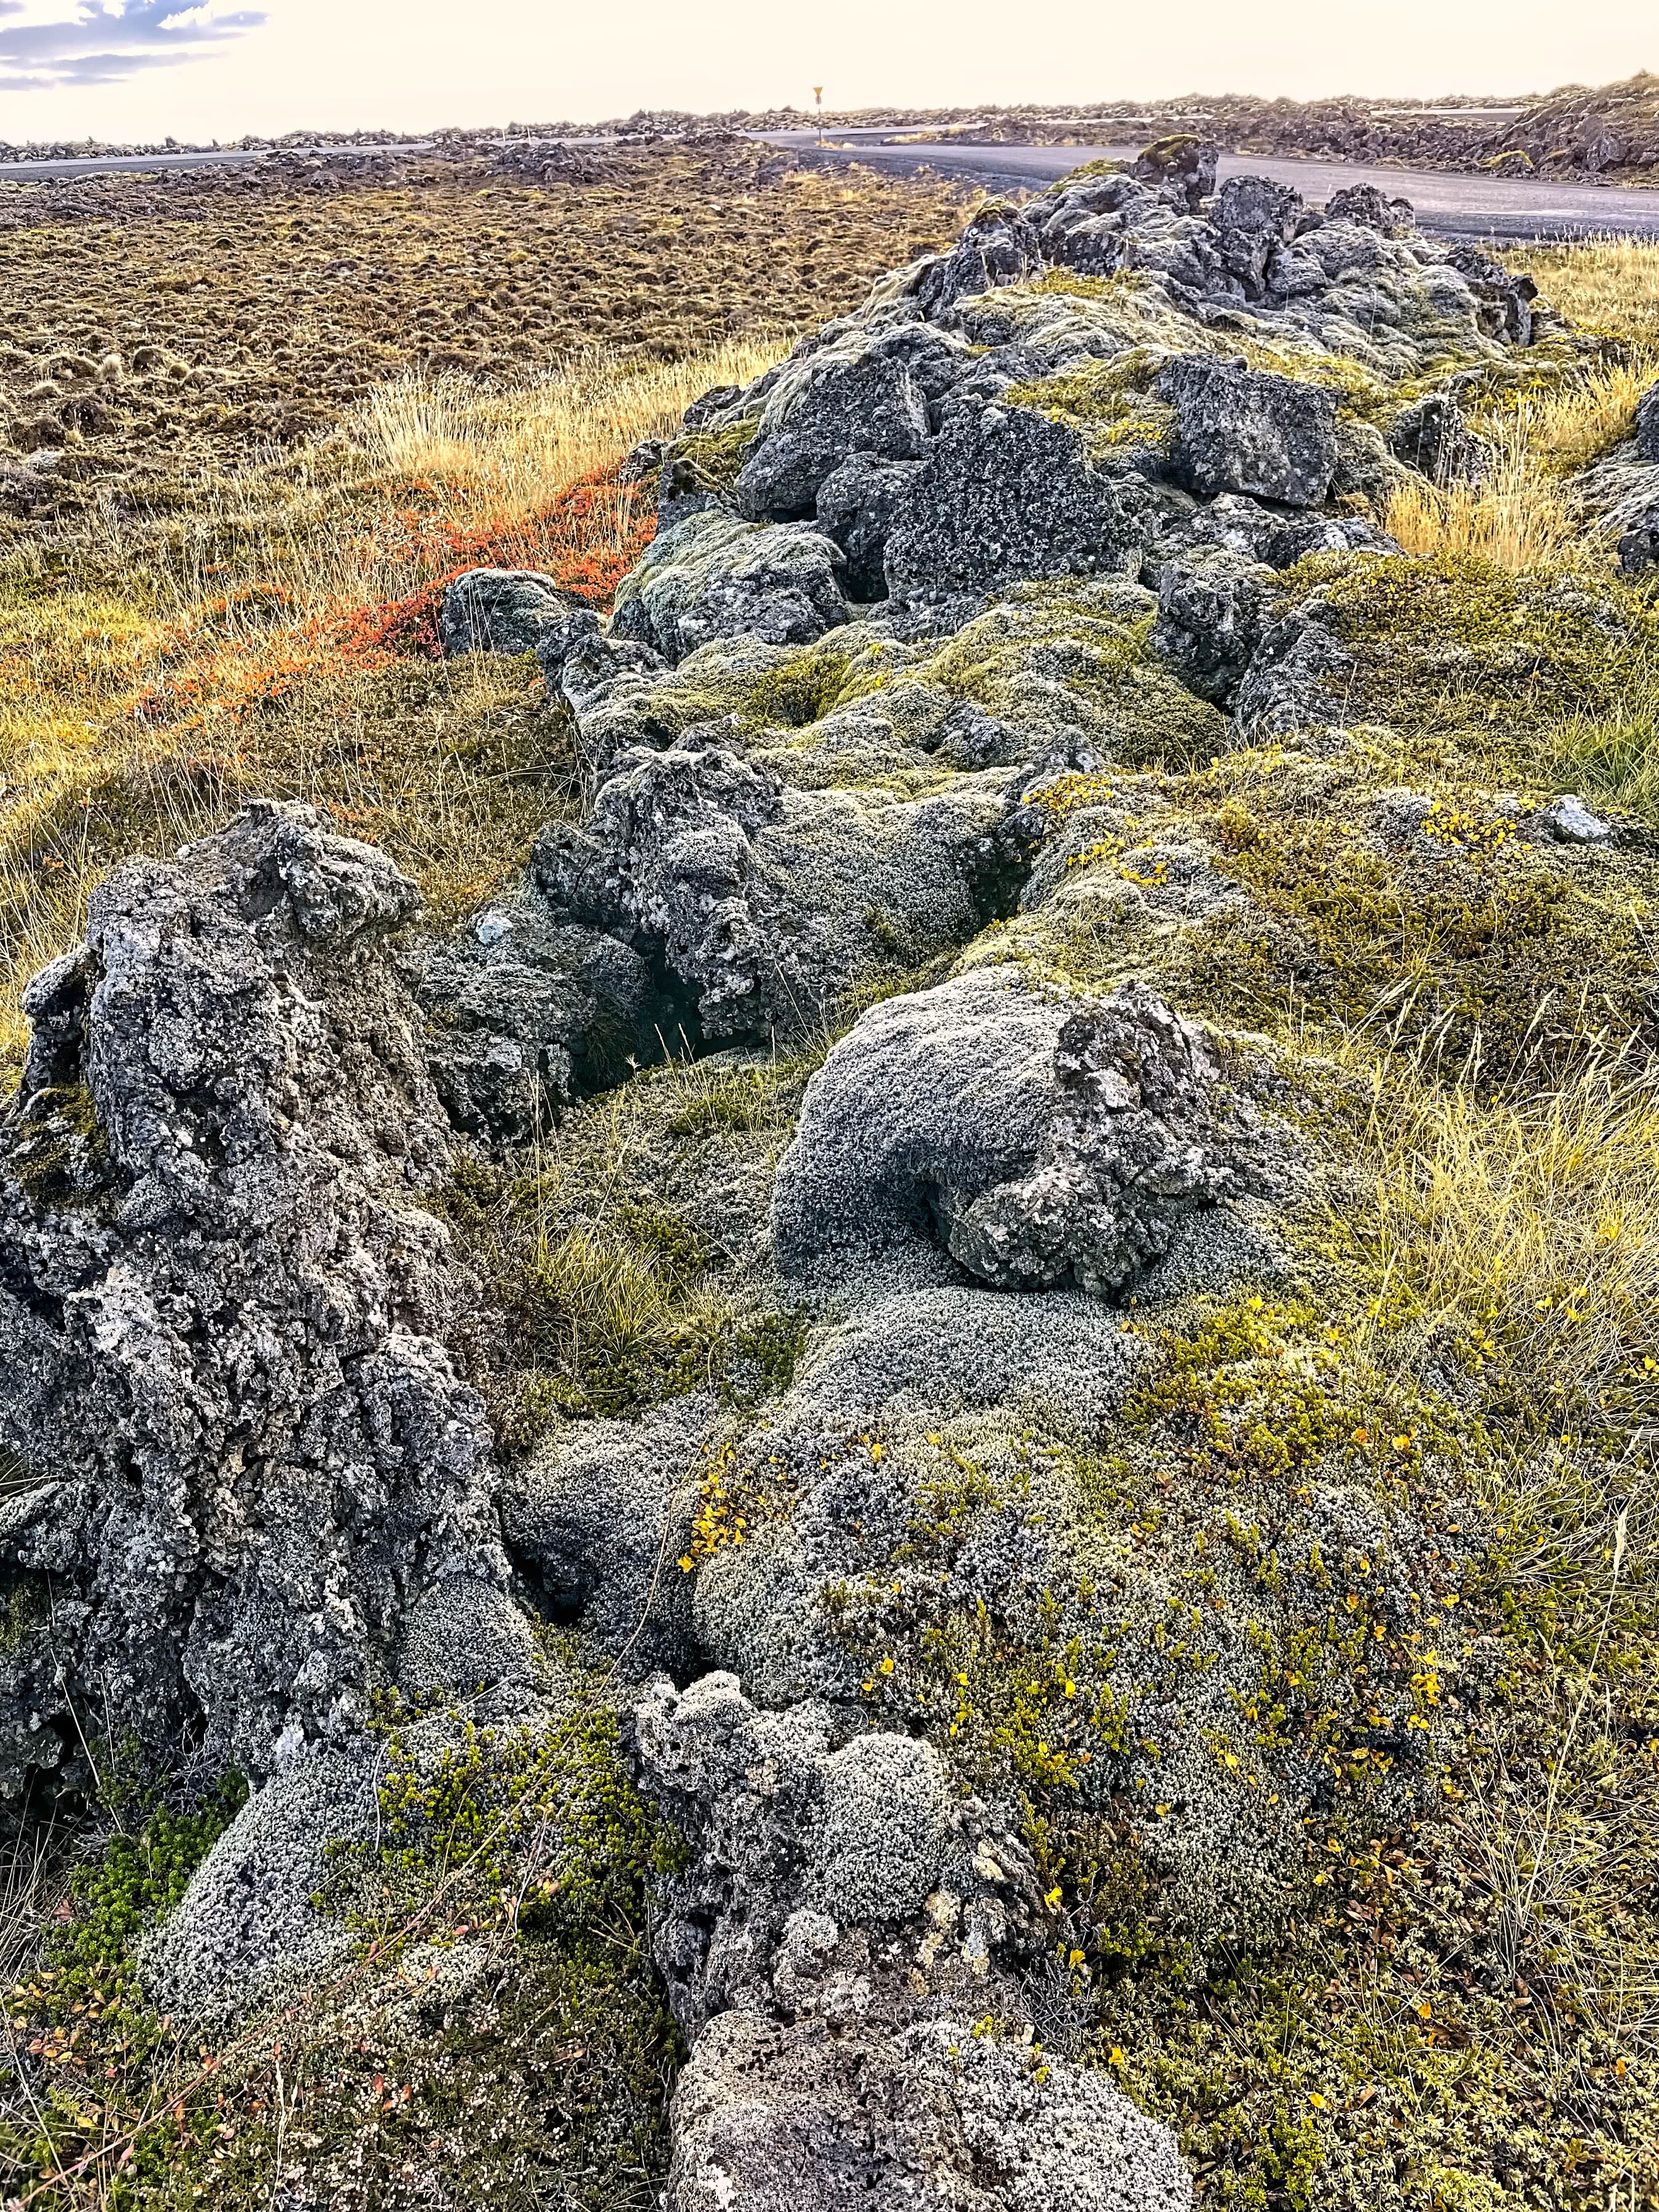 The Sulfur and Moss Covered Rocks